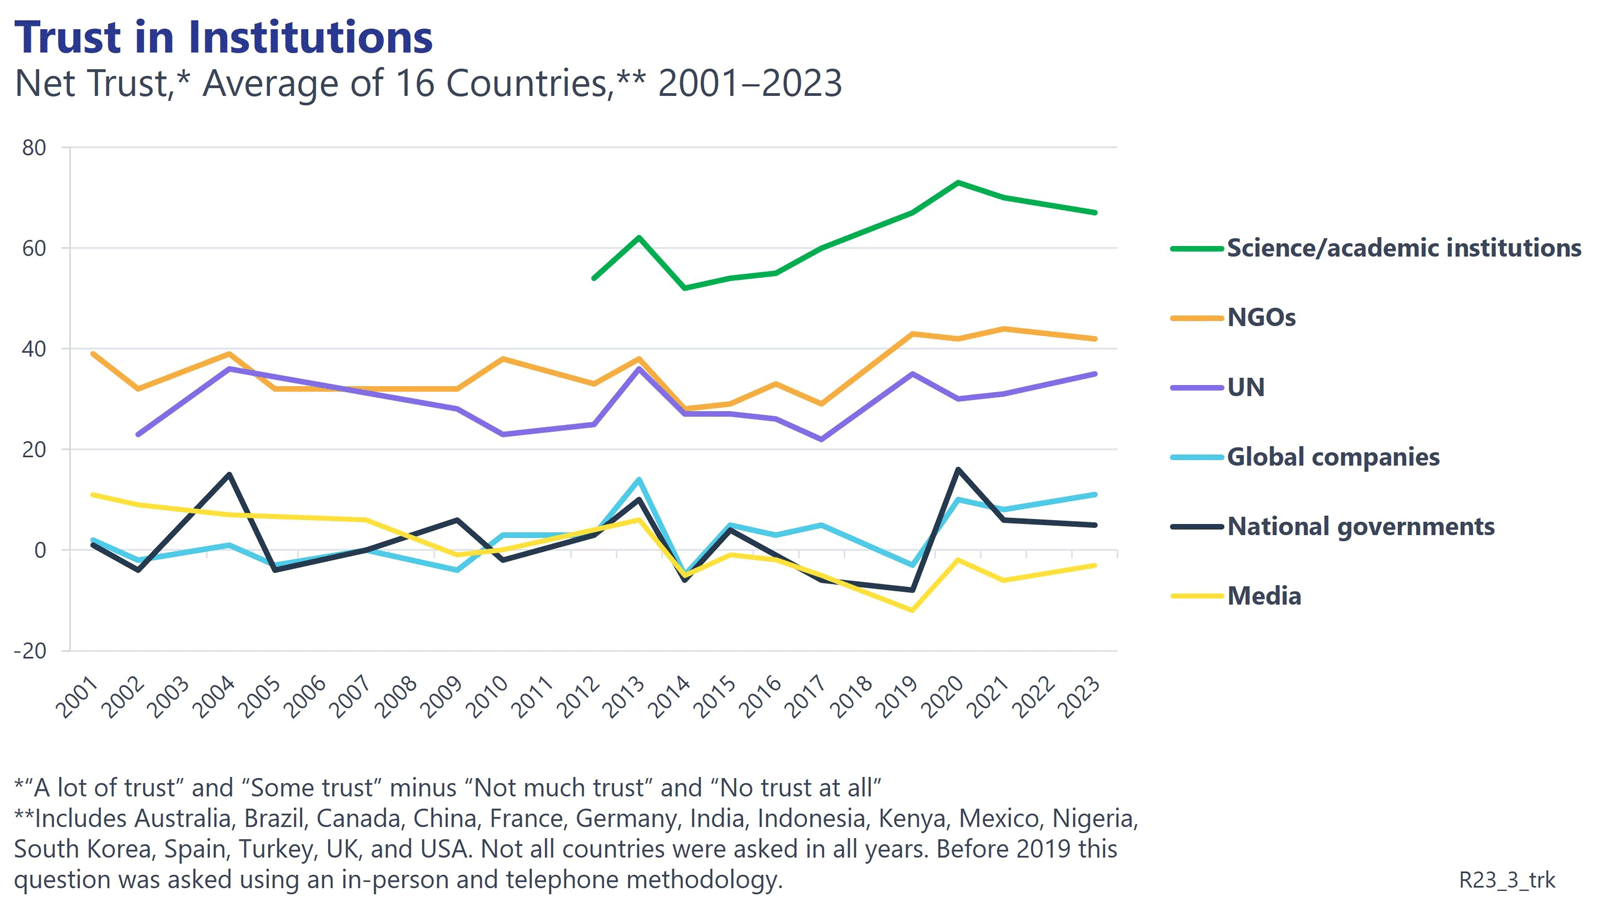 Line chart showing Net Trust in Institutions, average of 16 countries 2001-2023